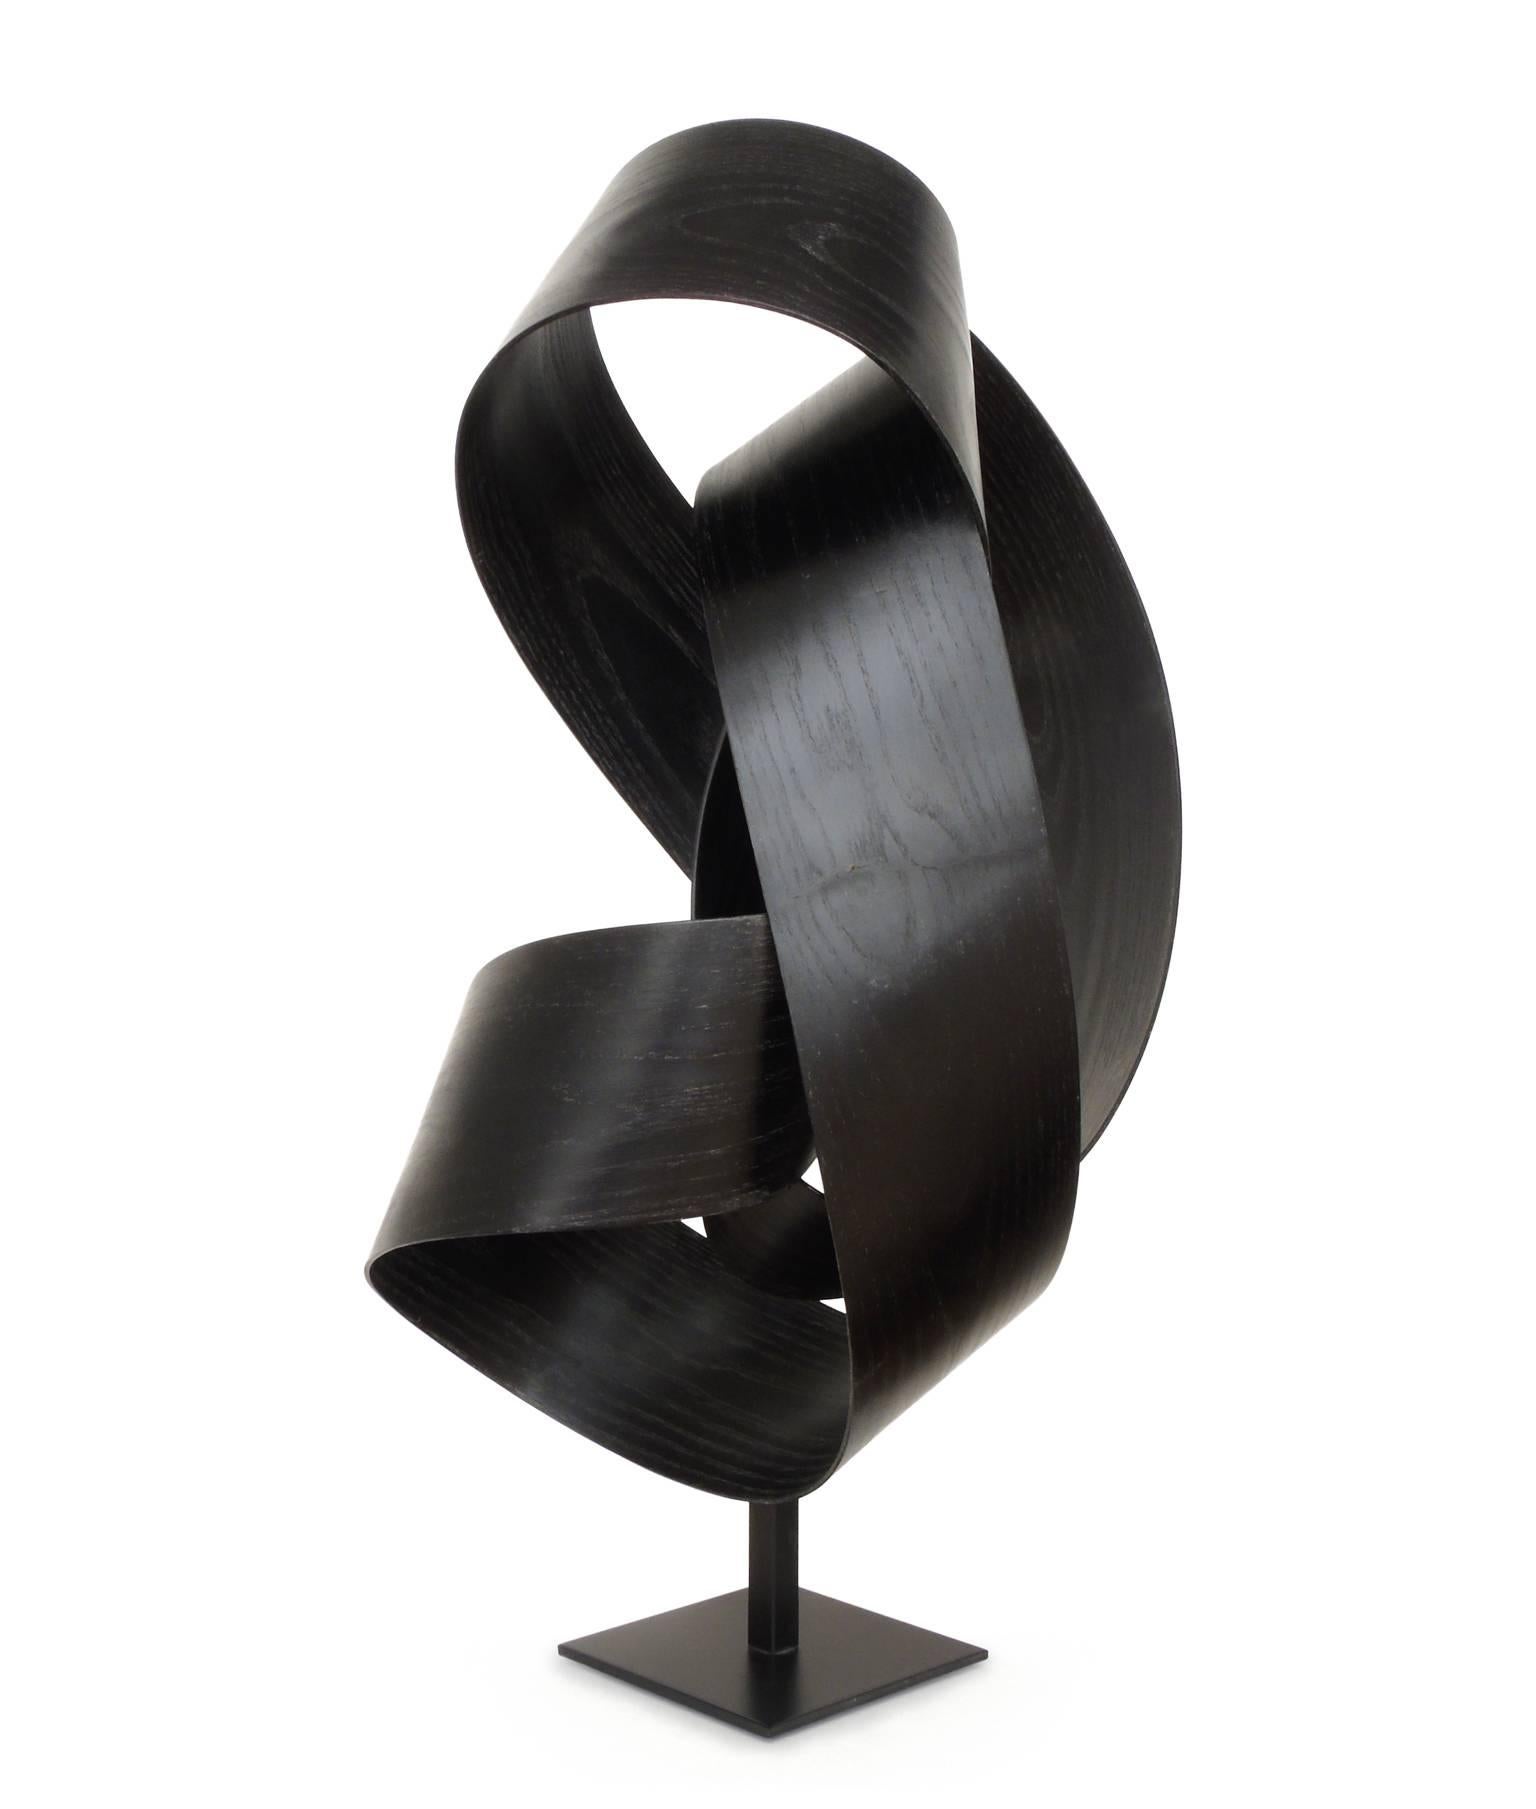 This black ribbon of wood is a nice example of work by sculptor Jeremy Holmes whose bentwood creations range in scale from modestly sized free standing sculptures to gravity defying installations of wood ribbons over a quarter mile in length.